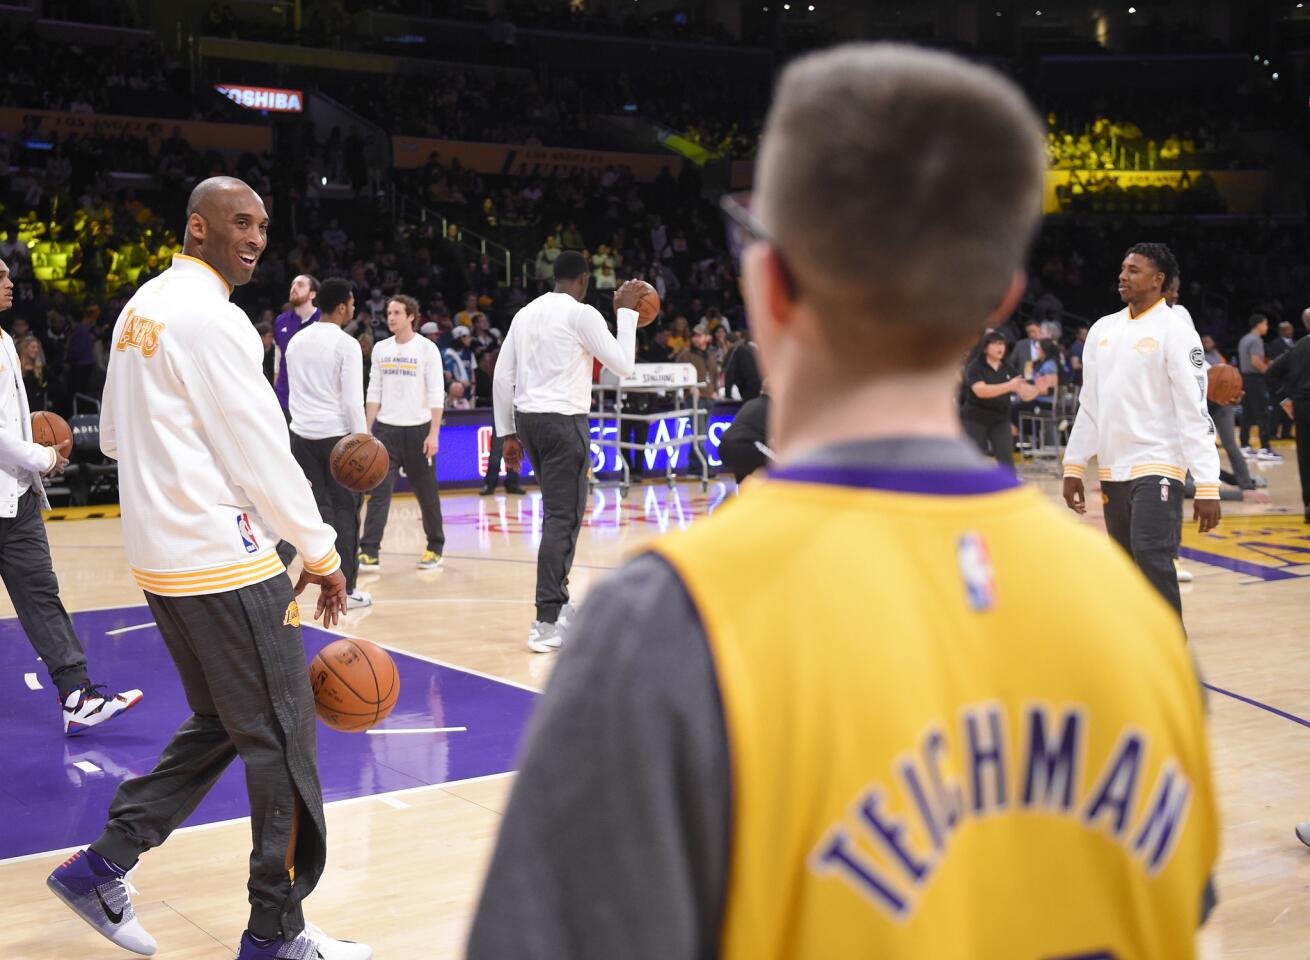 Los Angeles Lakers forward Kobe Bryant, left, talks with Make-A-Wish recipient, Yitzi Tiechman prior to an NBA basketball game against the Charlotte Hornets, Sunday, Jan. 31, 2016, in Los Angeles. The Lakers signed Teichman to a one day contract with the Lakers prior to the game. (AP Photo/Mark J. Terrill)